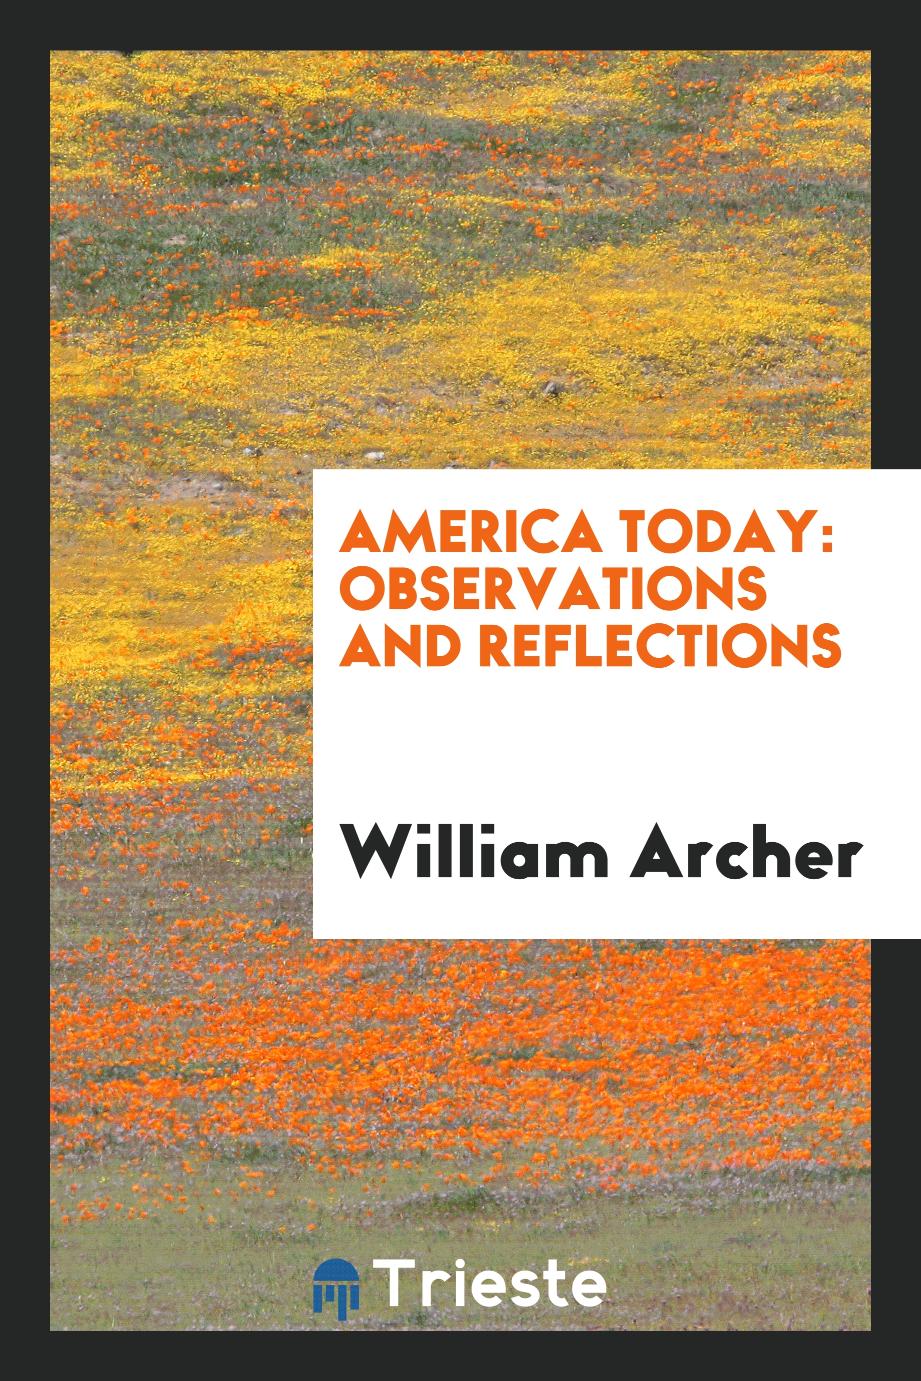 America Today: Observations and Reflections